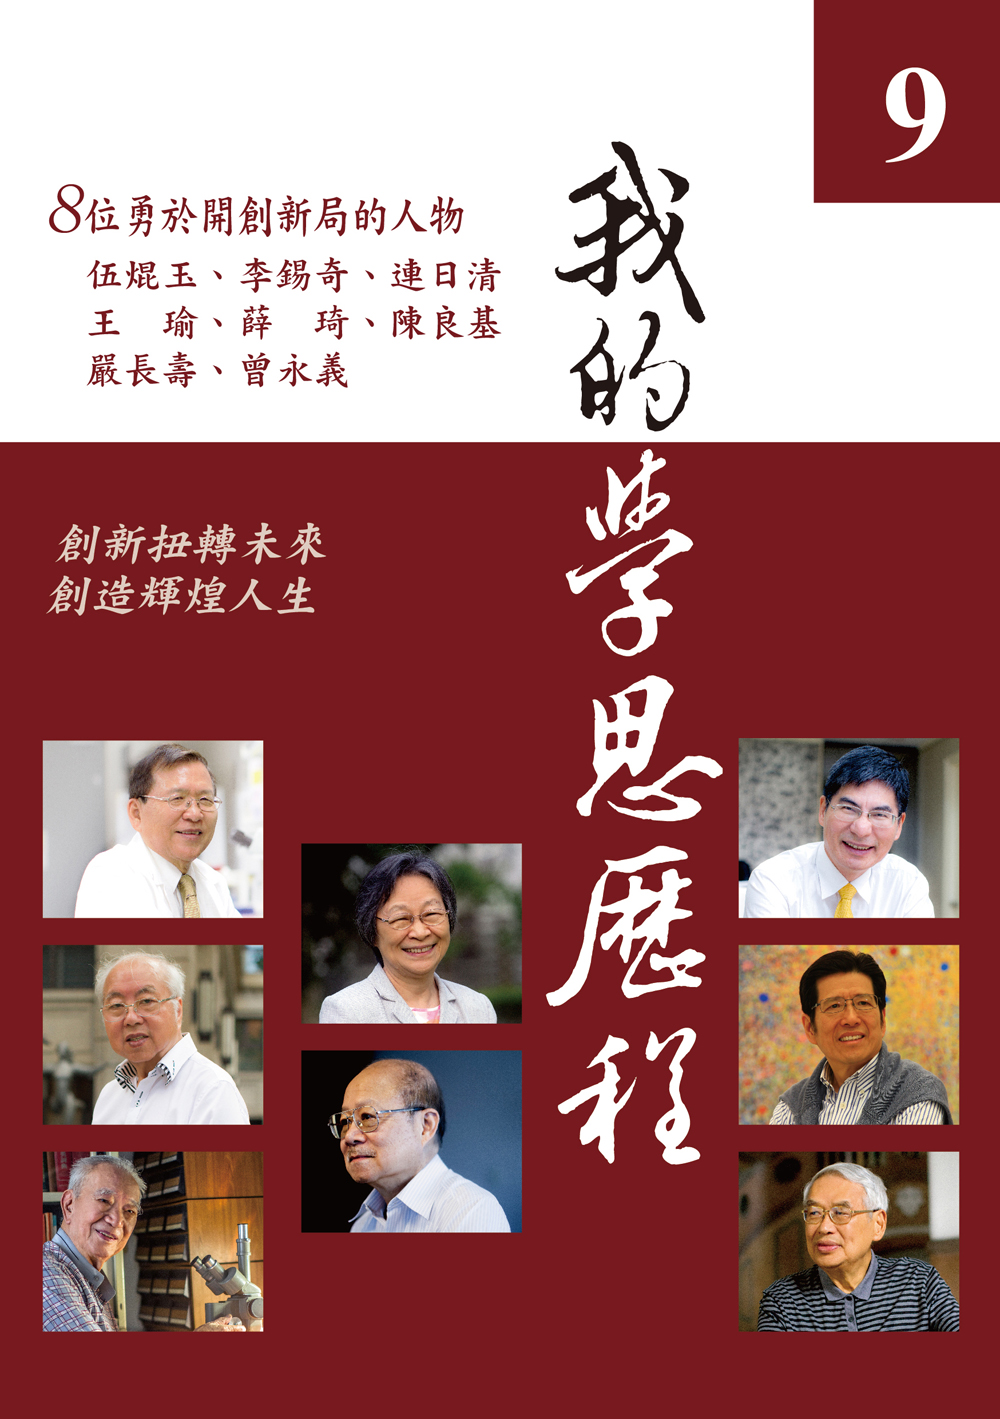 NTU Lectures on the Intellectual and Spiritual Pilgrimage (Vol. 9)